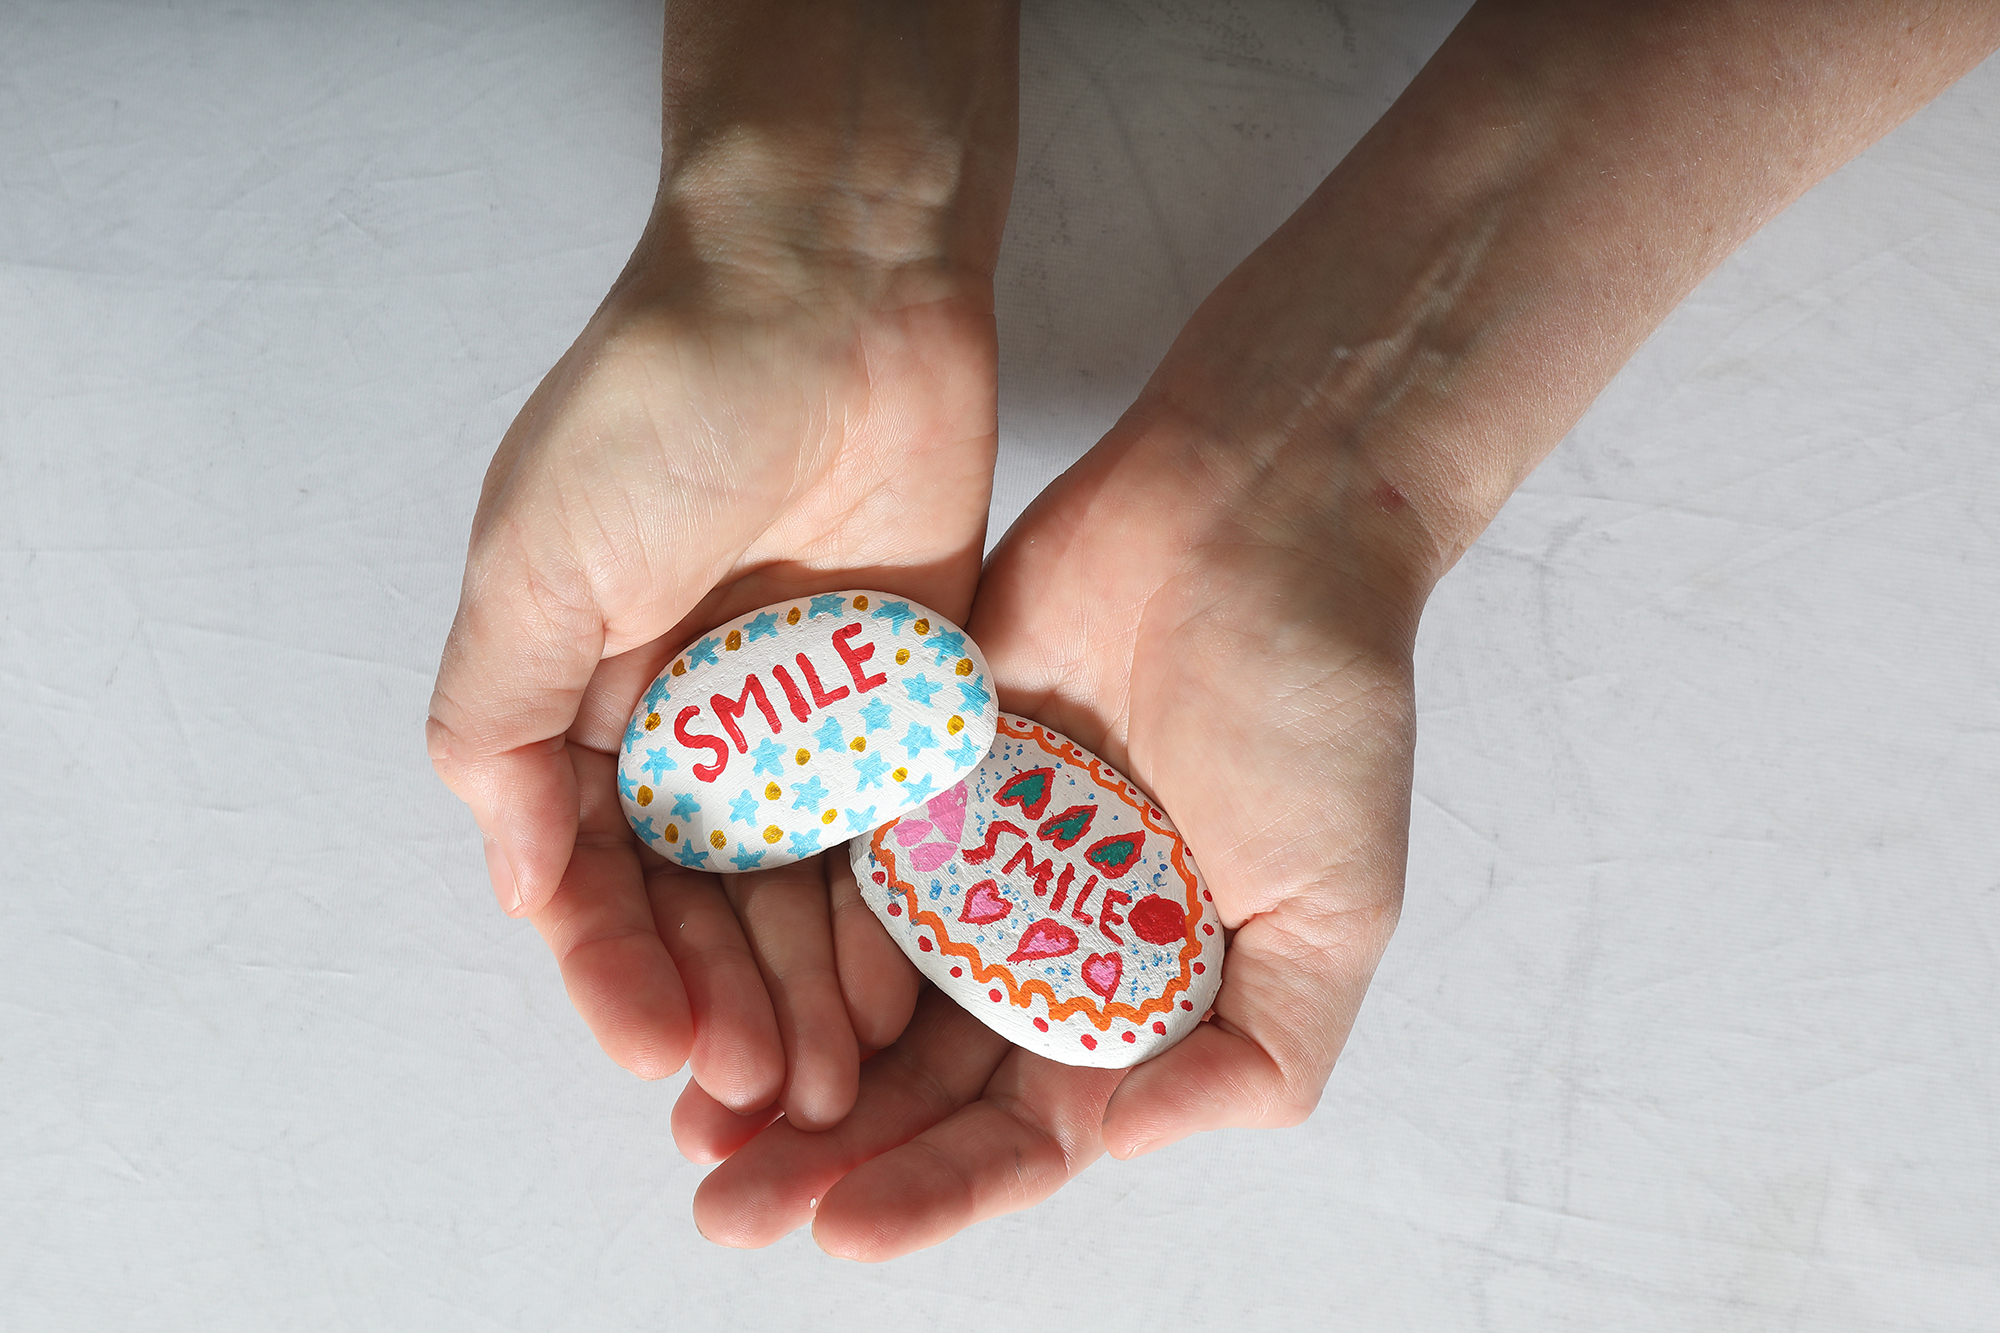 stones painted by dental clinic patients